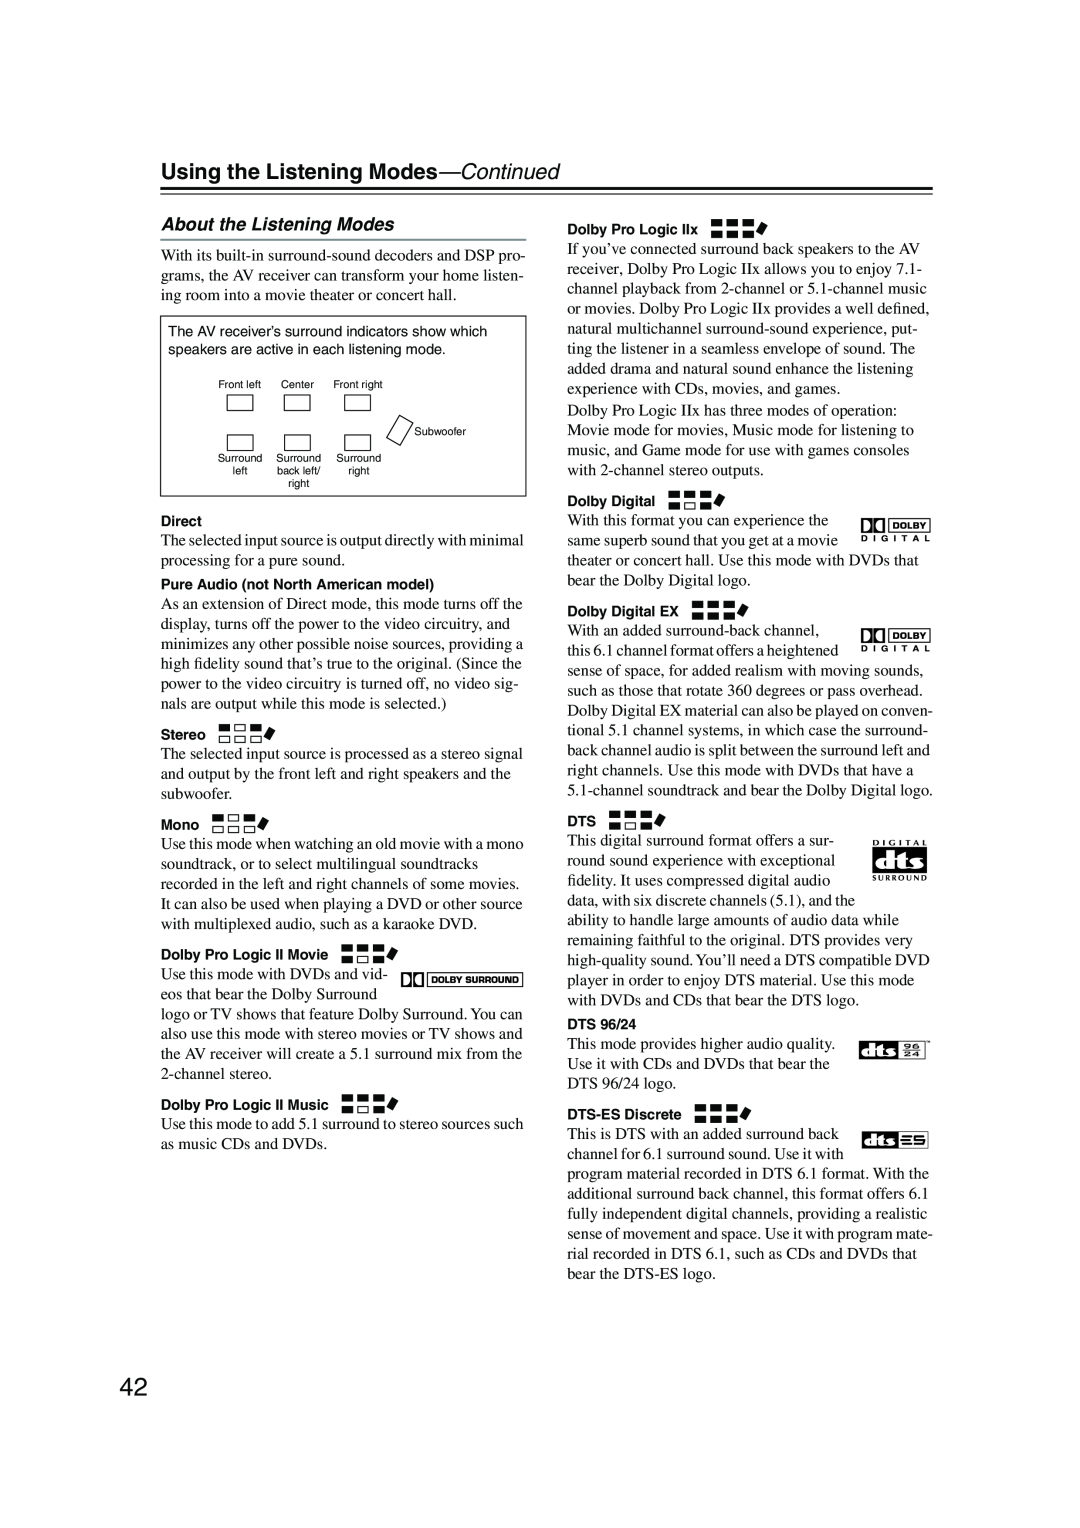 Onkyo HT-S780 instruction manual About the Listening Modes, Using the Listening Modes-Continued 